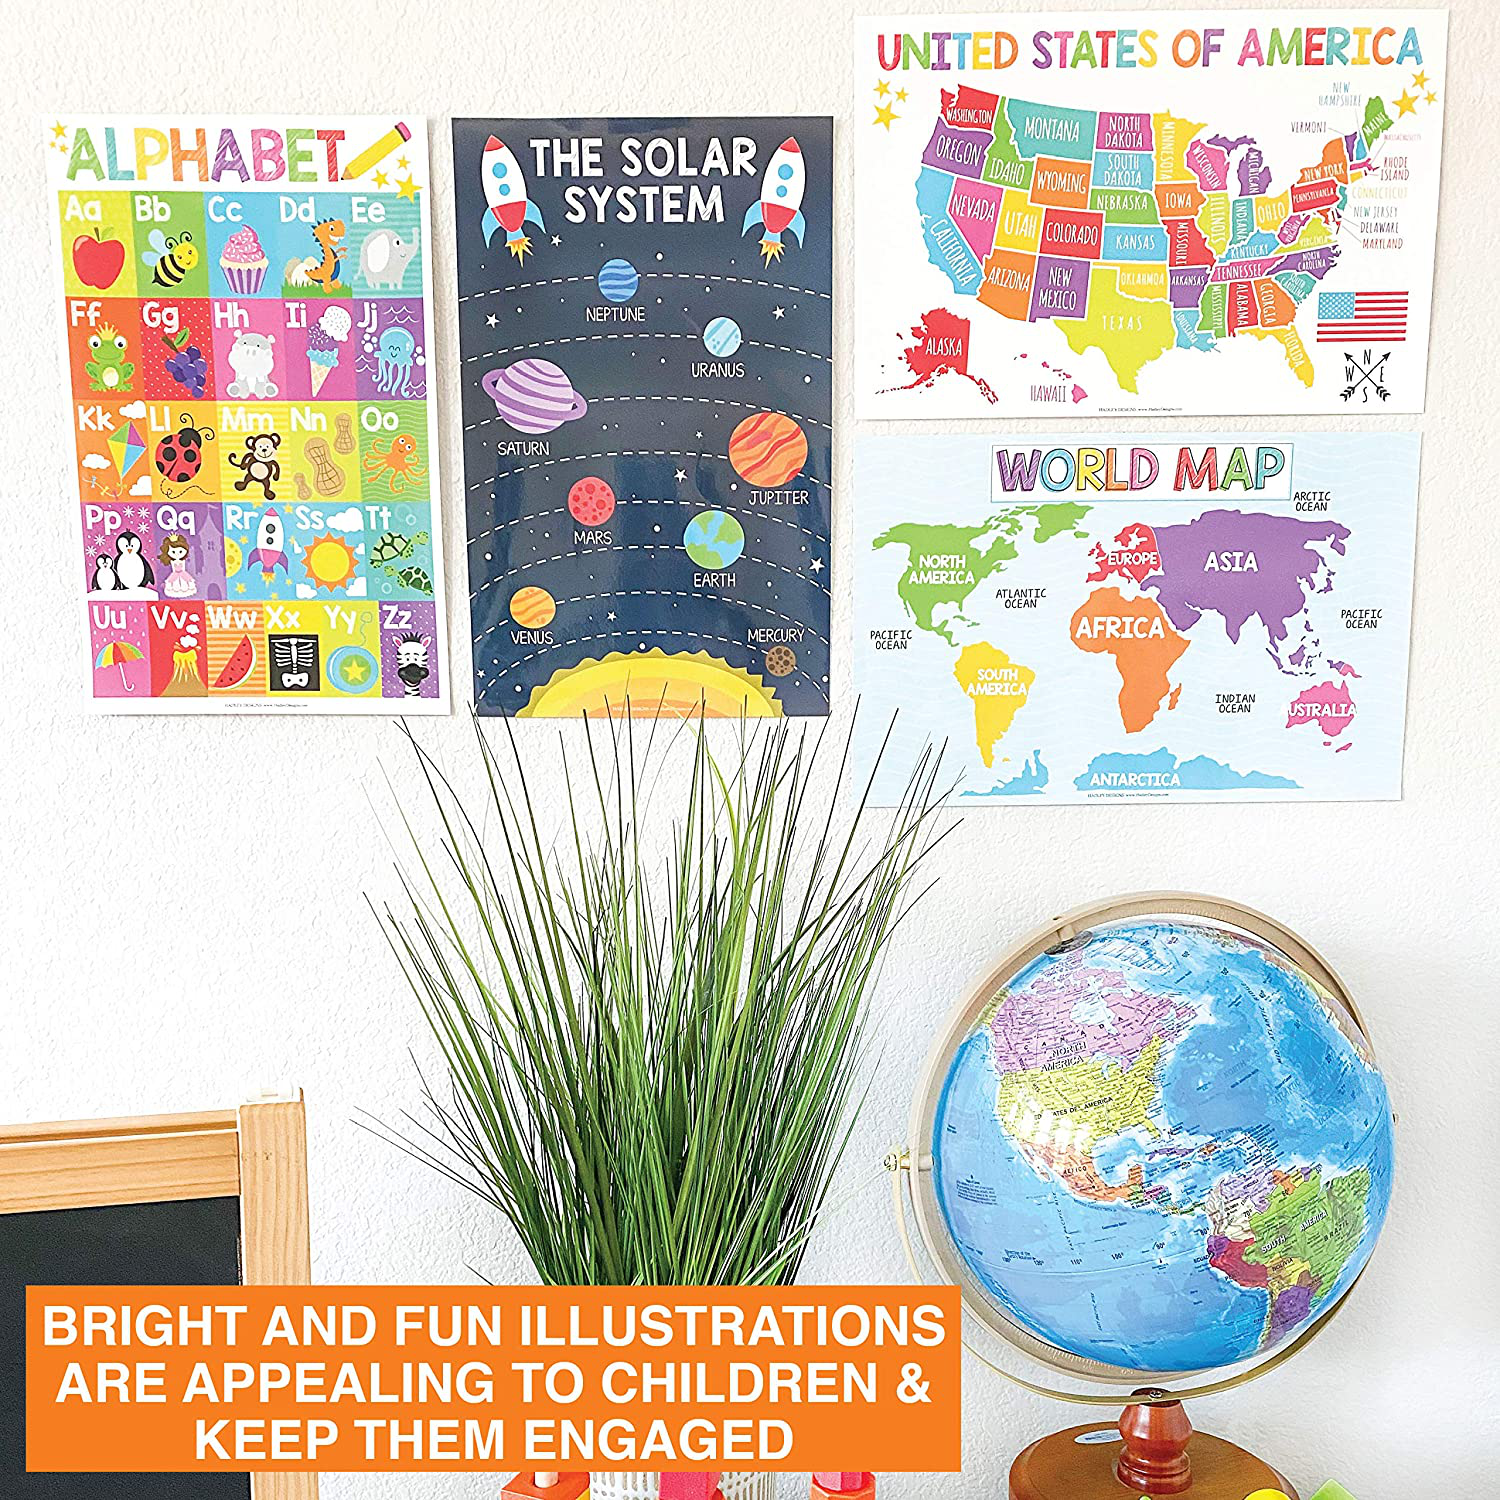 4 Alphabet, Map of United States, World Map, Solar System, ABC Posters Toddlers Wall Art Decor, Planets For Kid Chart, US Travel Map Laminated Kindergarten Classroom Prek Homeschool Supplies 11x17"